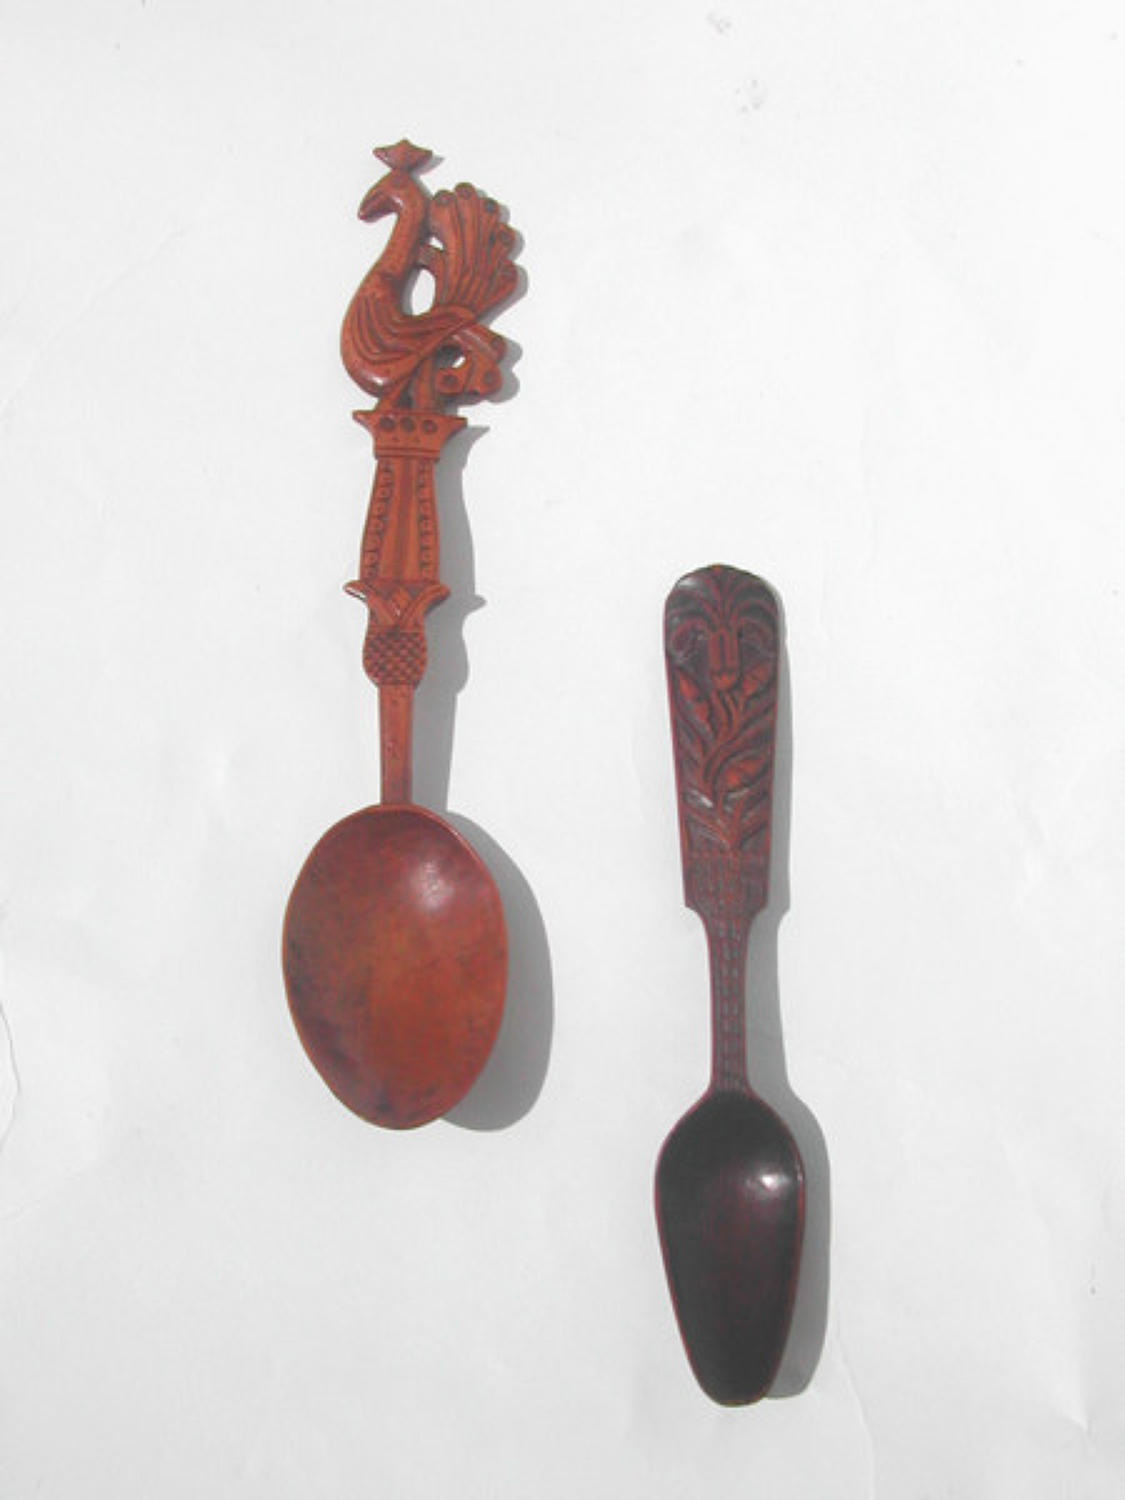 19th Century Sycamore and Birch Spoons. European C1846